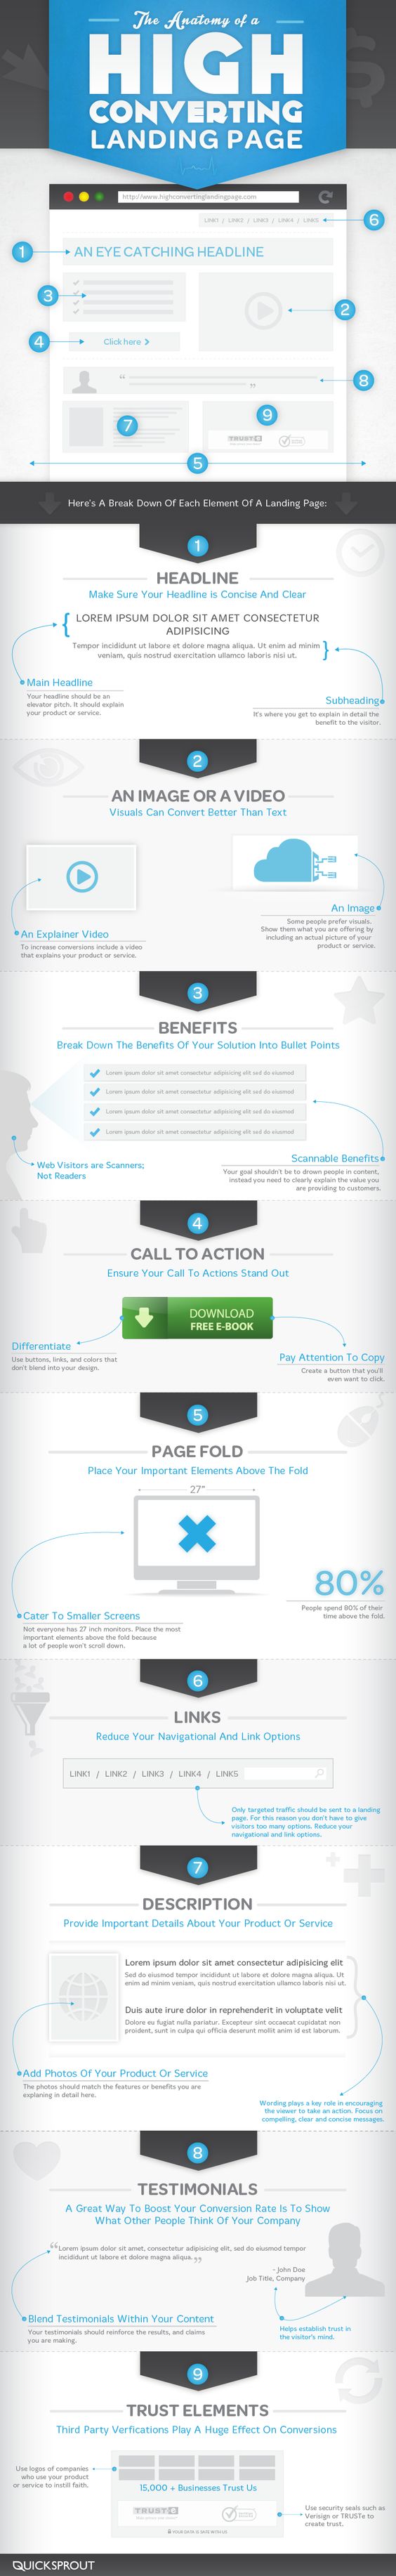 The Anatomy of a high converting Landing Page